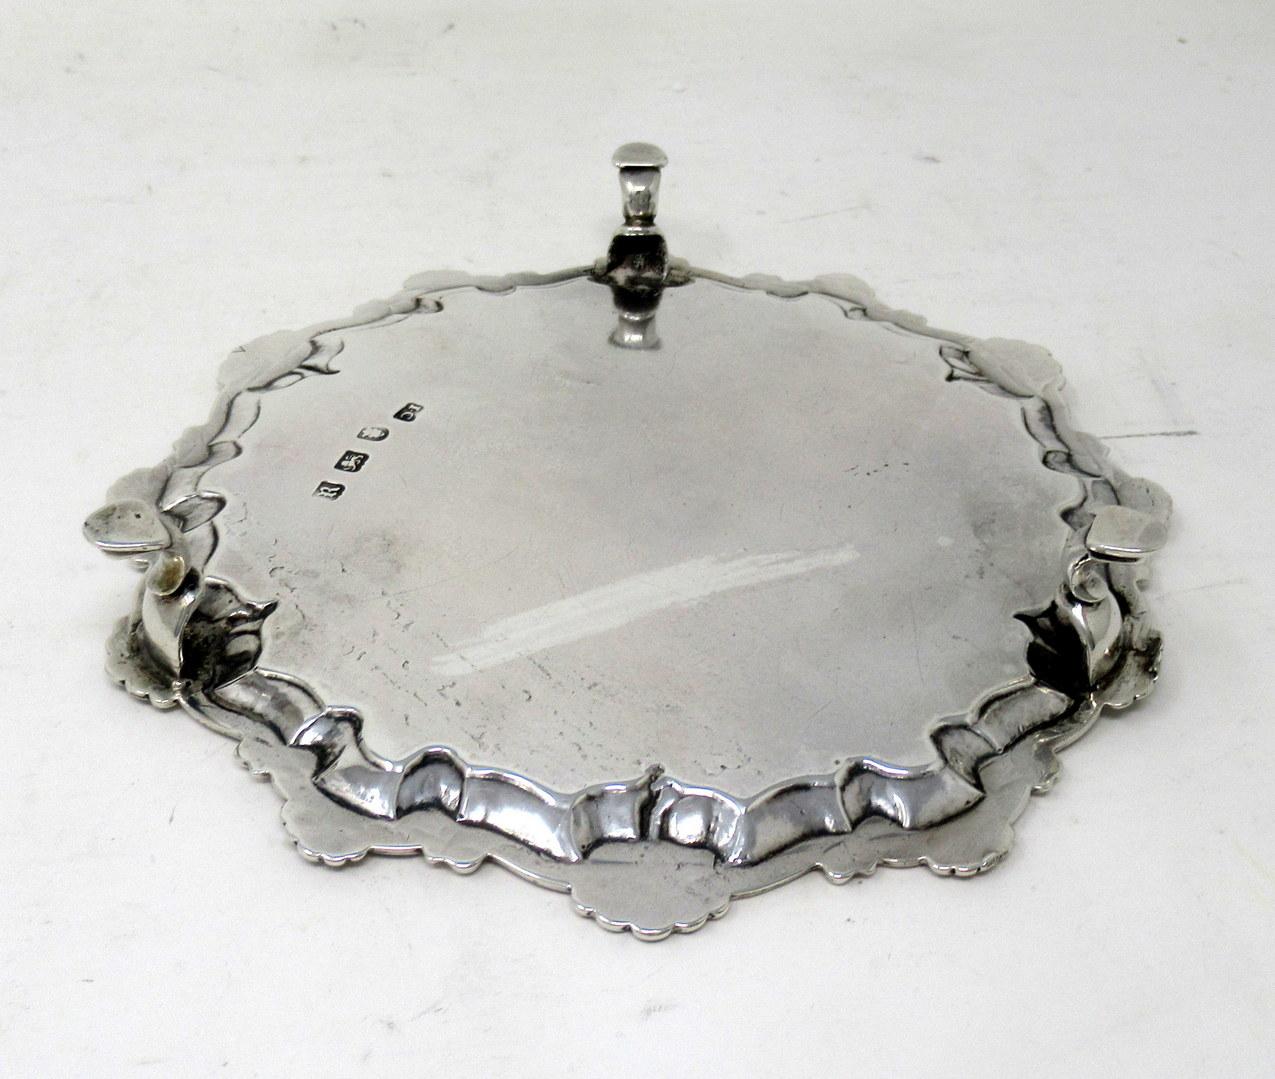 Antique Sterling Silver Georgian Serving Card Tray Eighteenth Century Hallmark In Good Condition For Sale In Dublin, Ireland